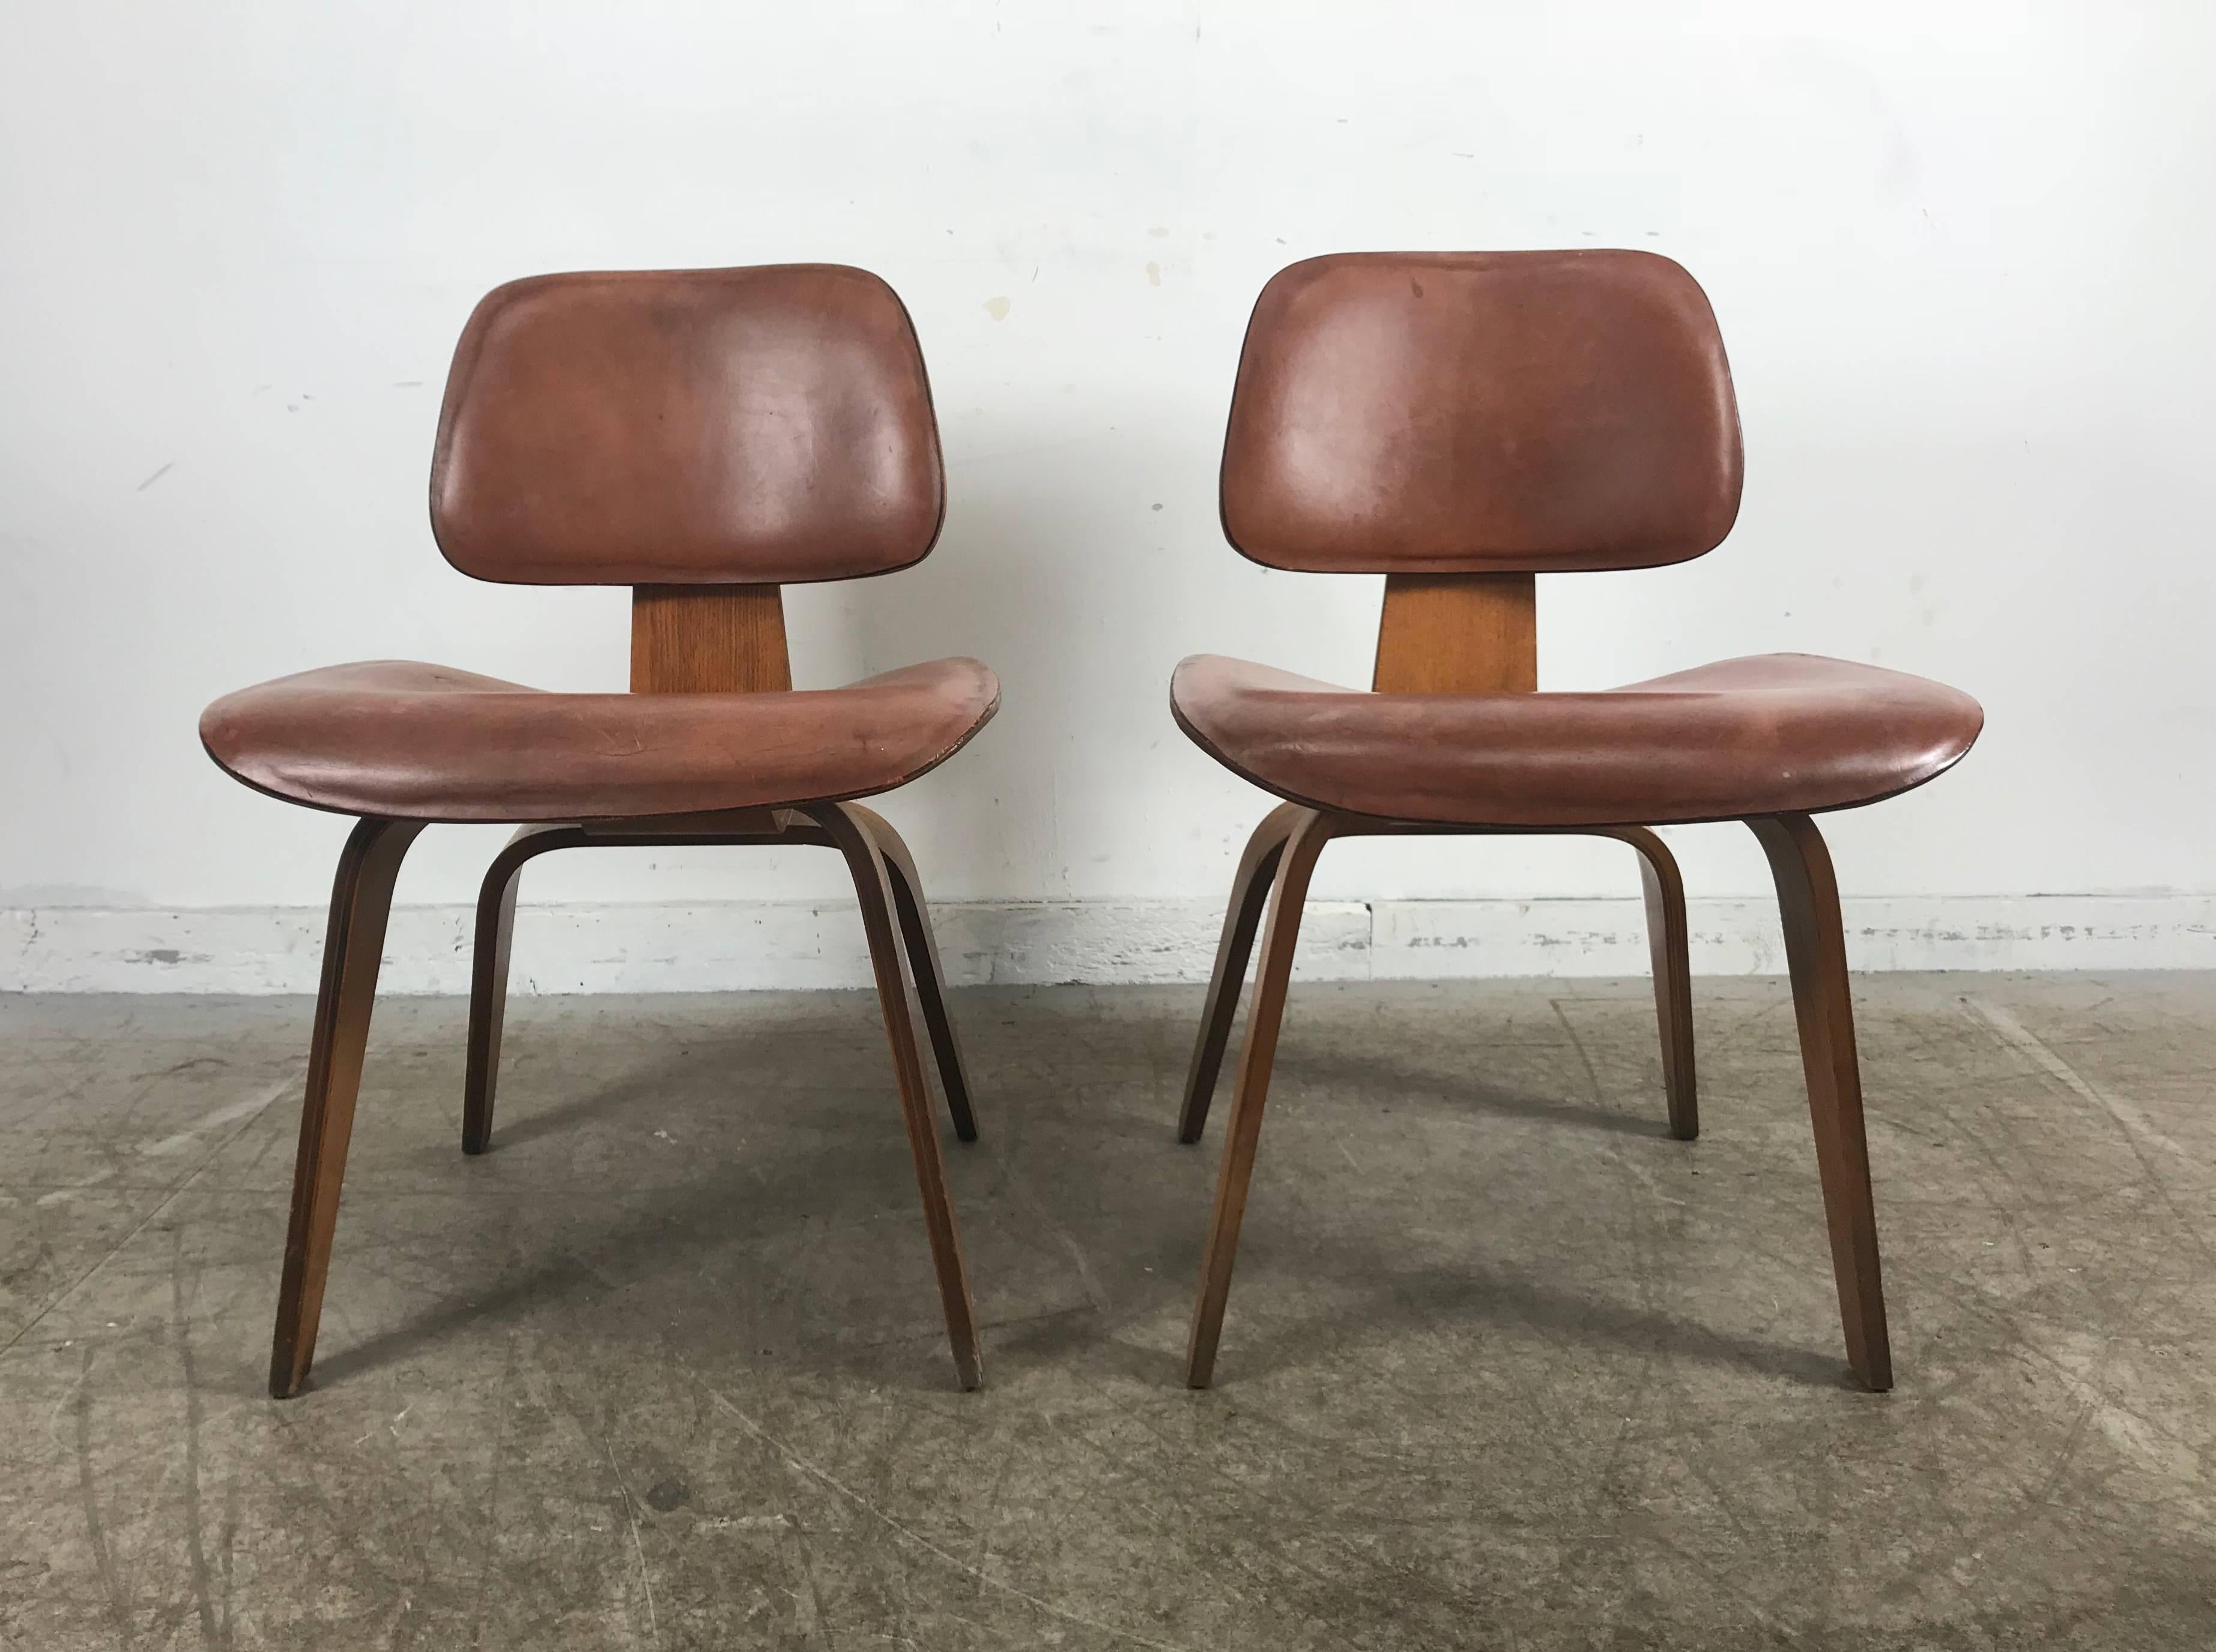 Mid-Century Modern Rare Early Production Pair of Leather and Walnut D C W's by Charles Eames